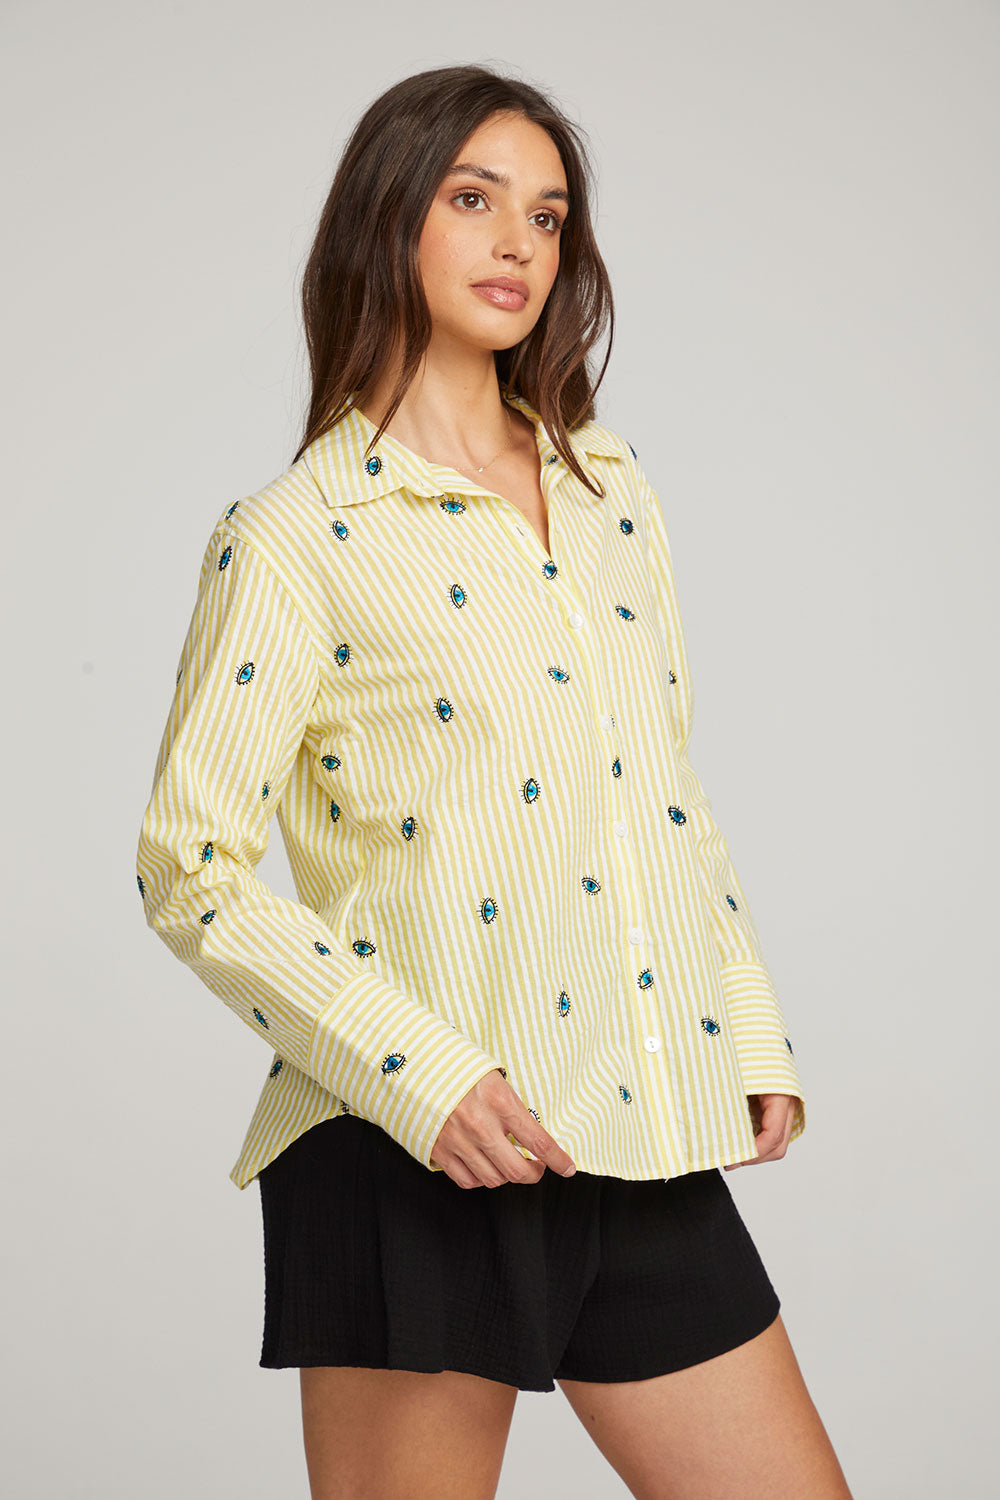 Allover Eye Button Down WOMENS chaserbrand